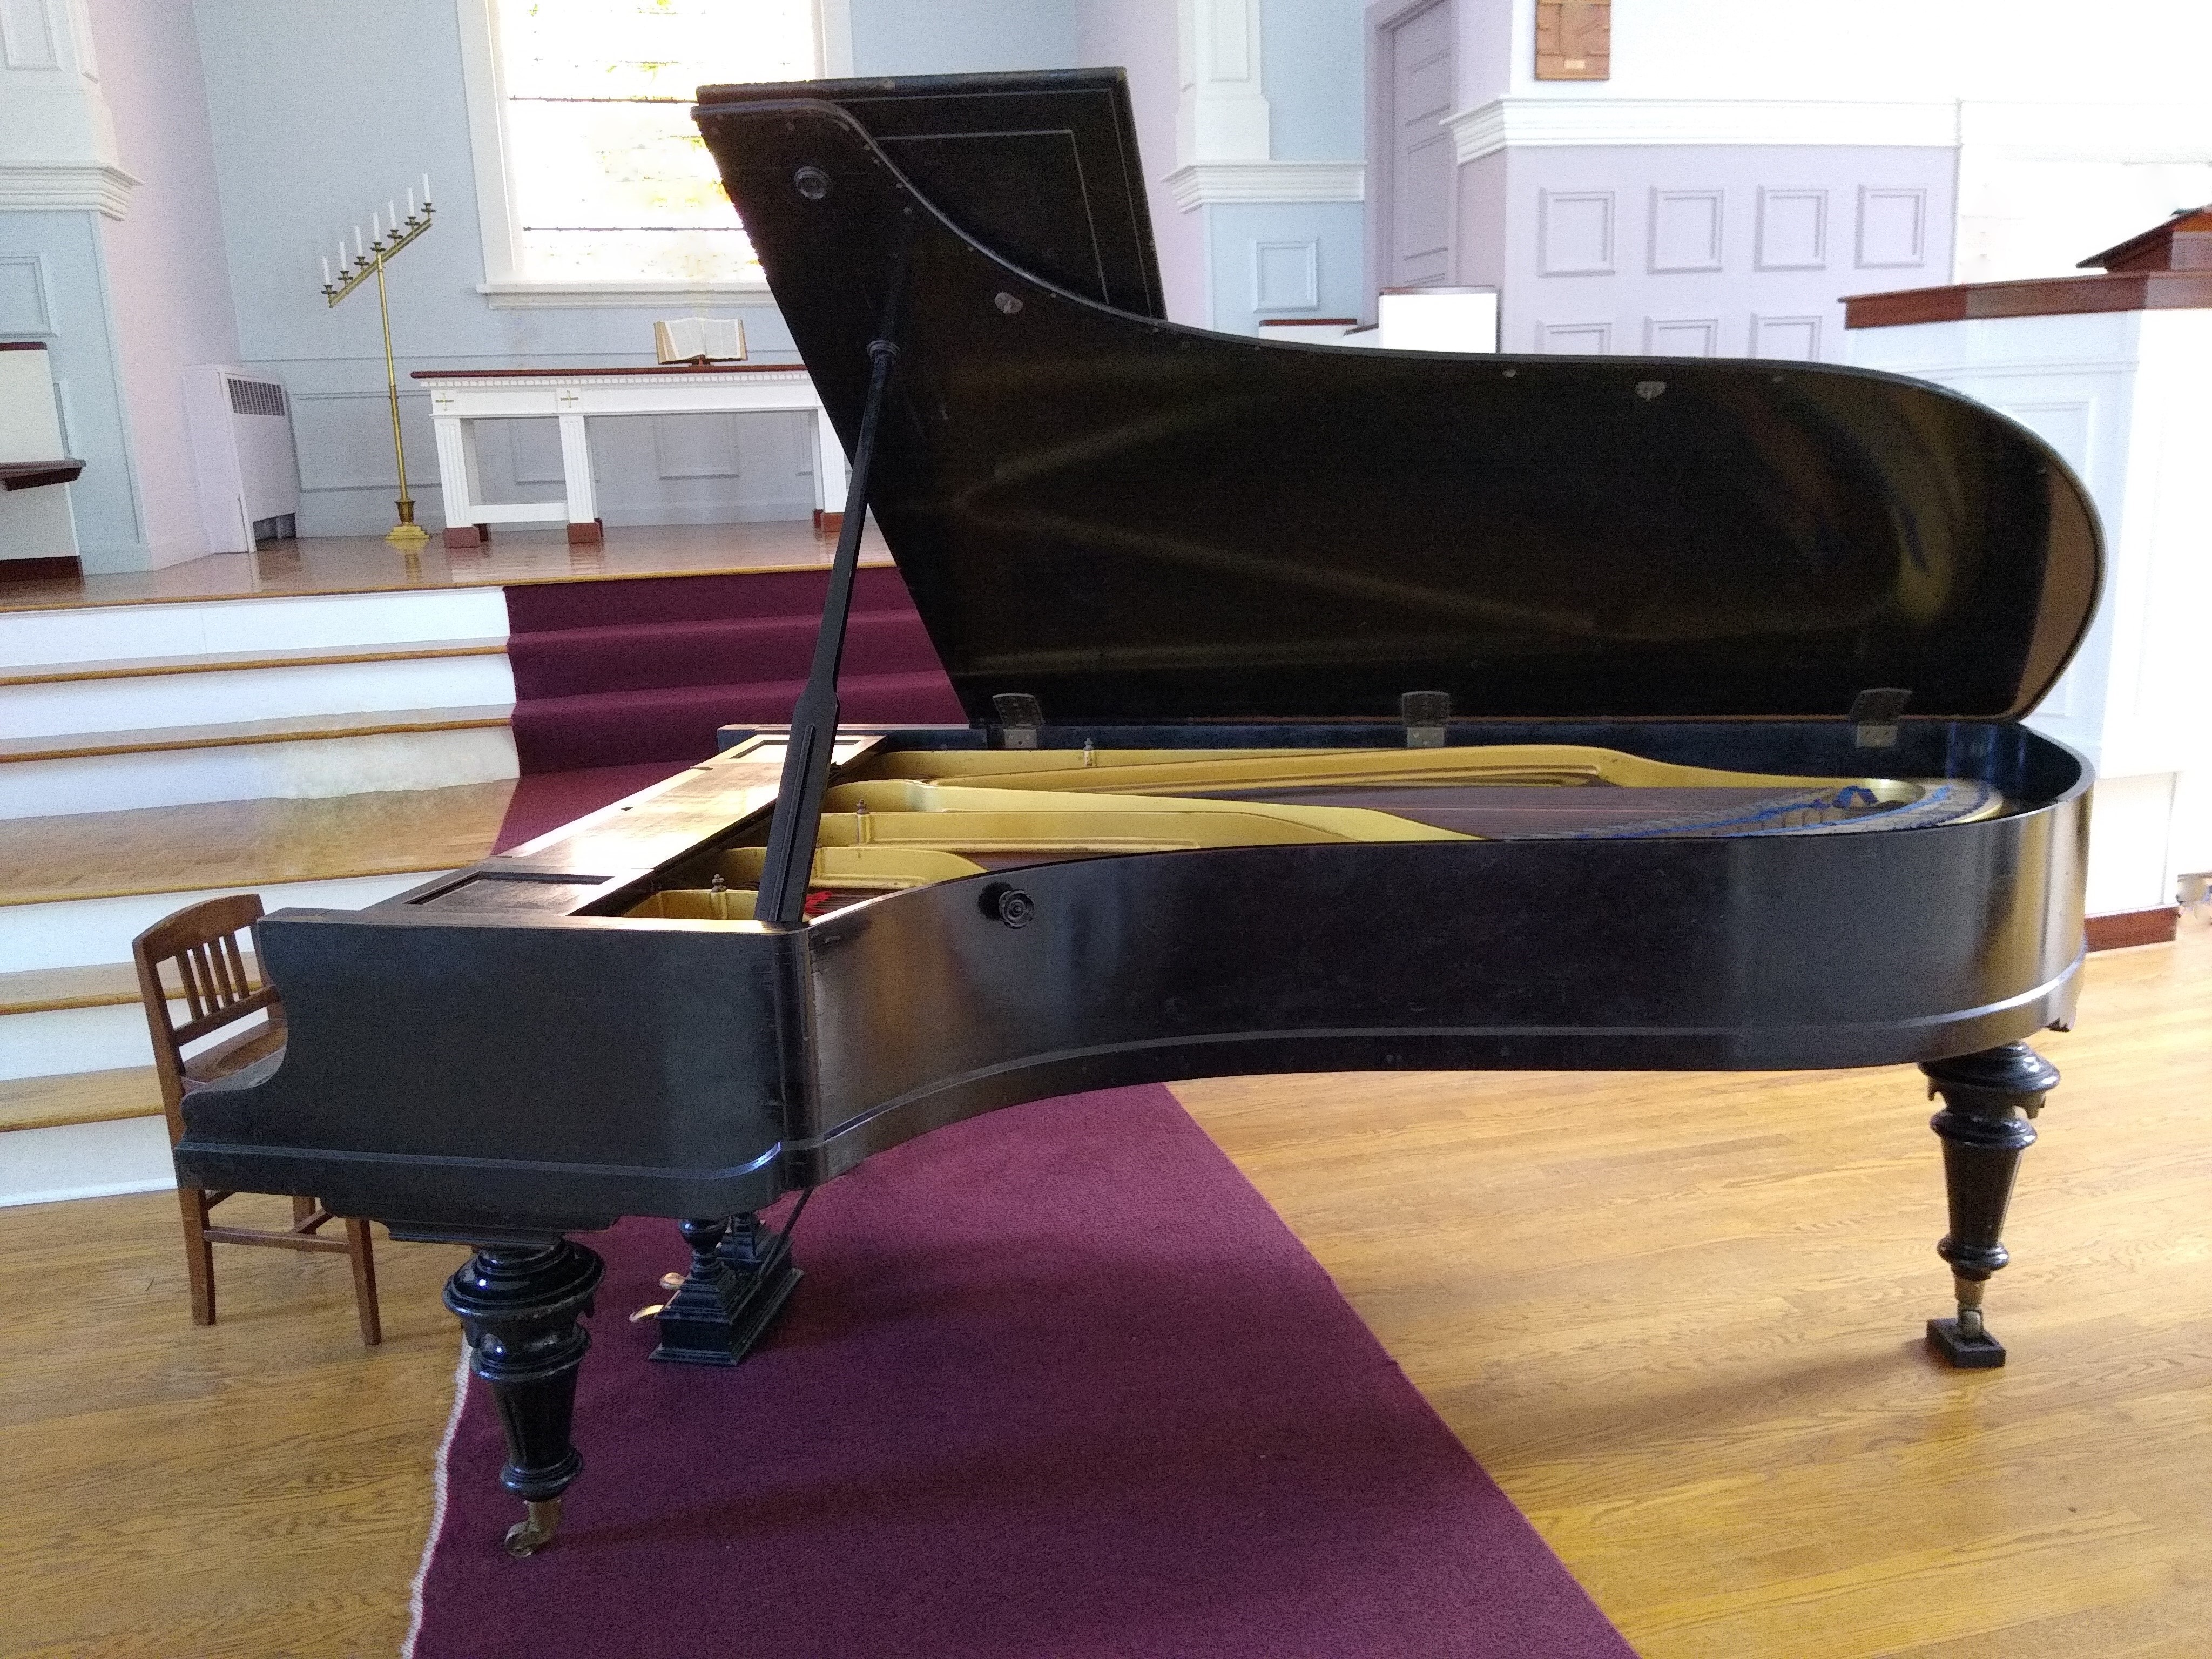 1907 Blüthner piano from the Frederick Collection